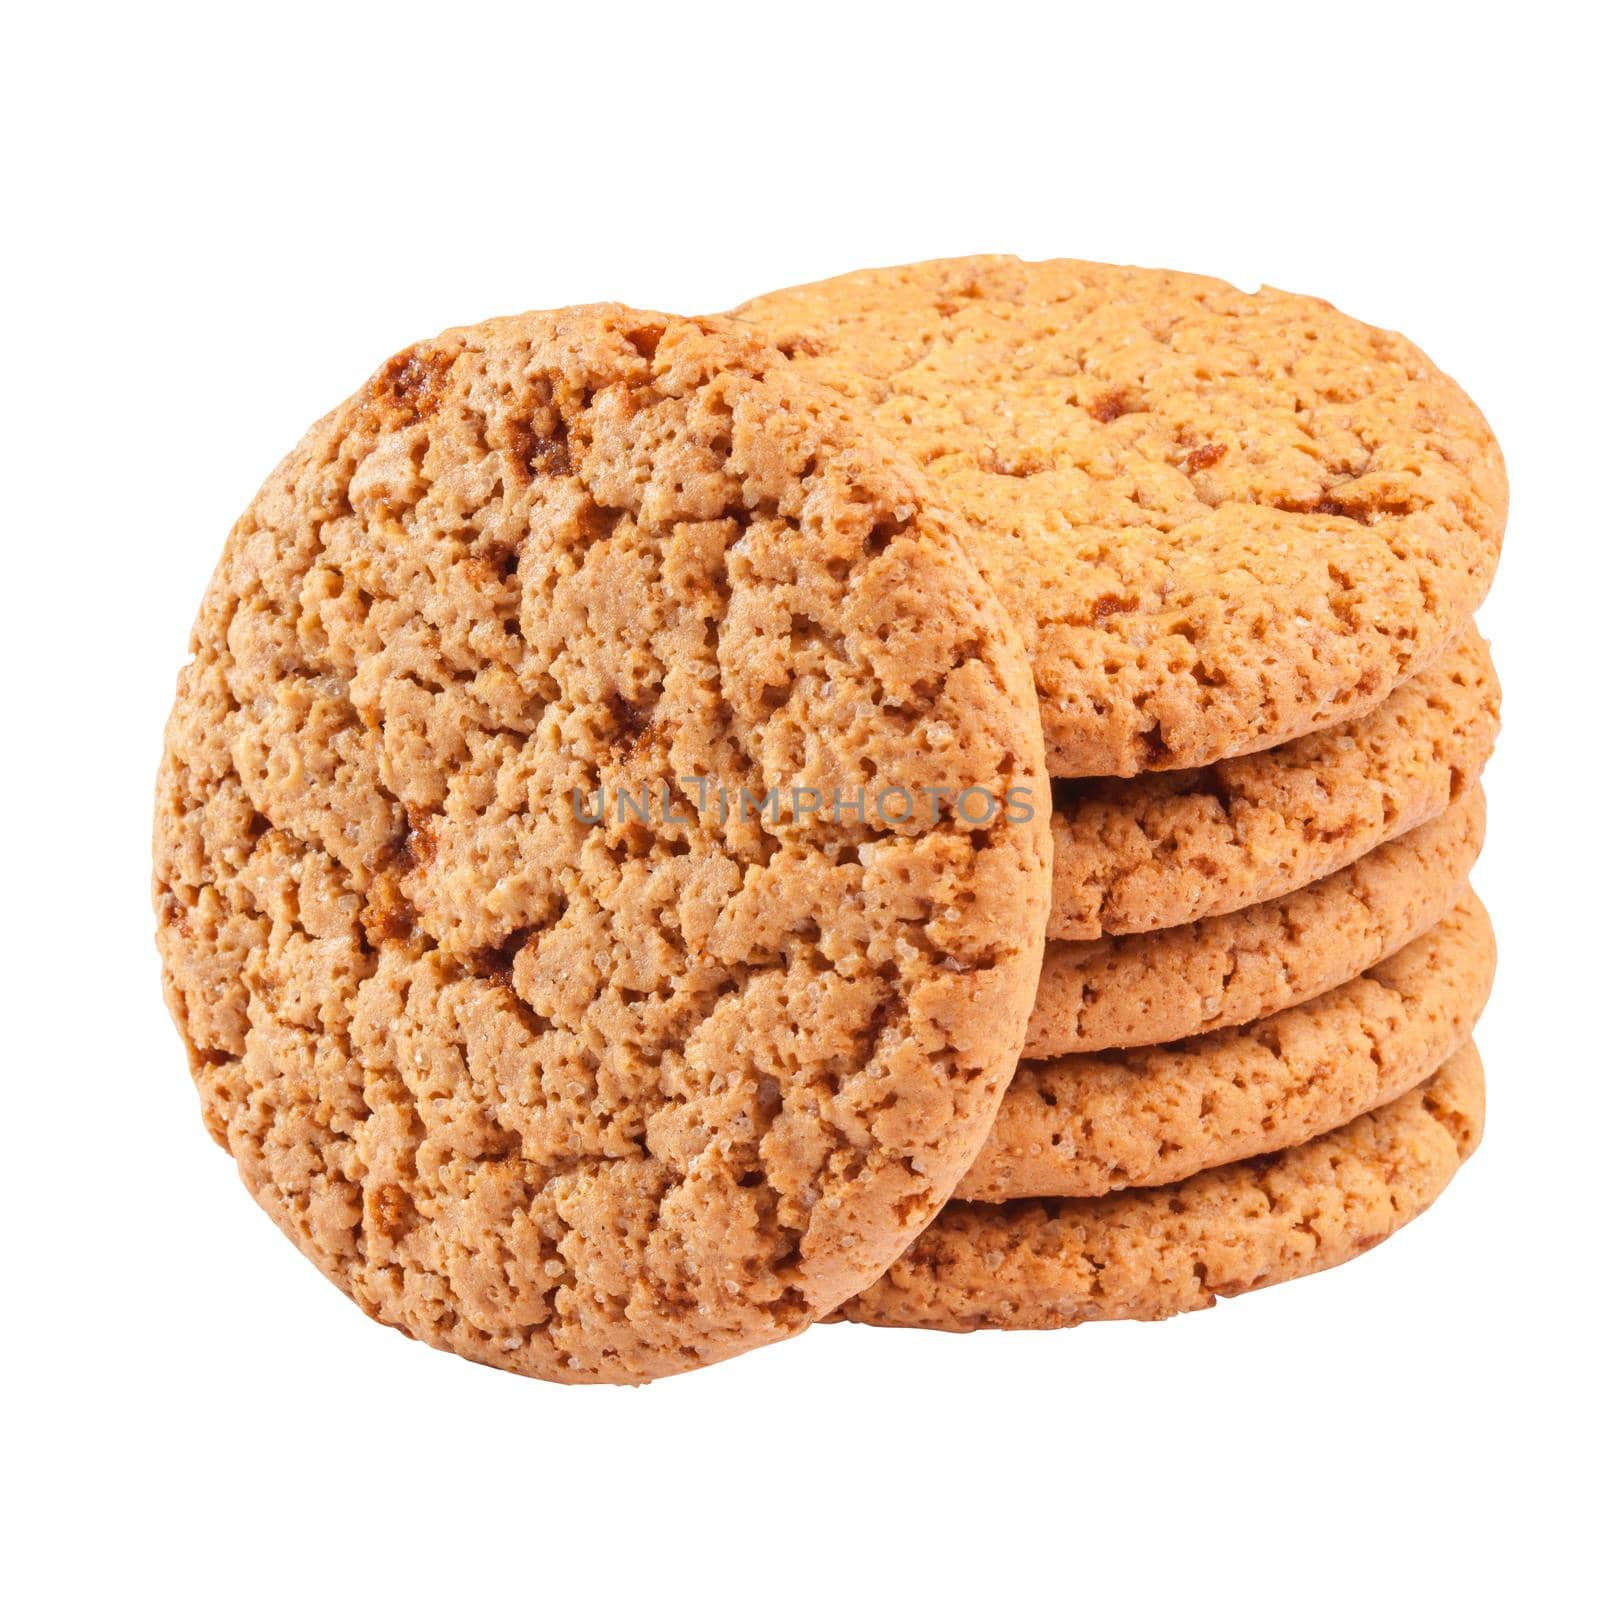 Closeup of delicious oatmeal cookies stacked isolated on white background. Popular sweet snacks